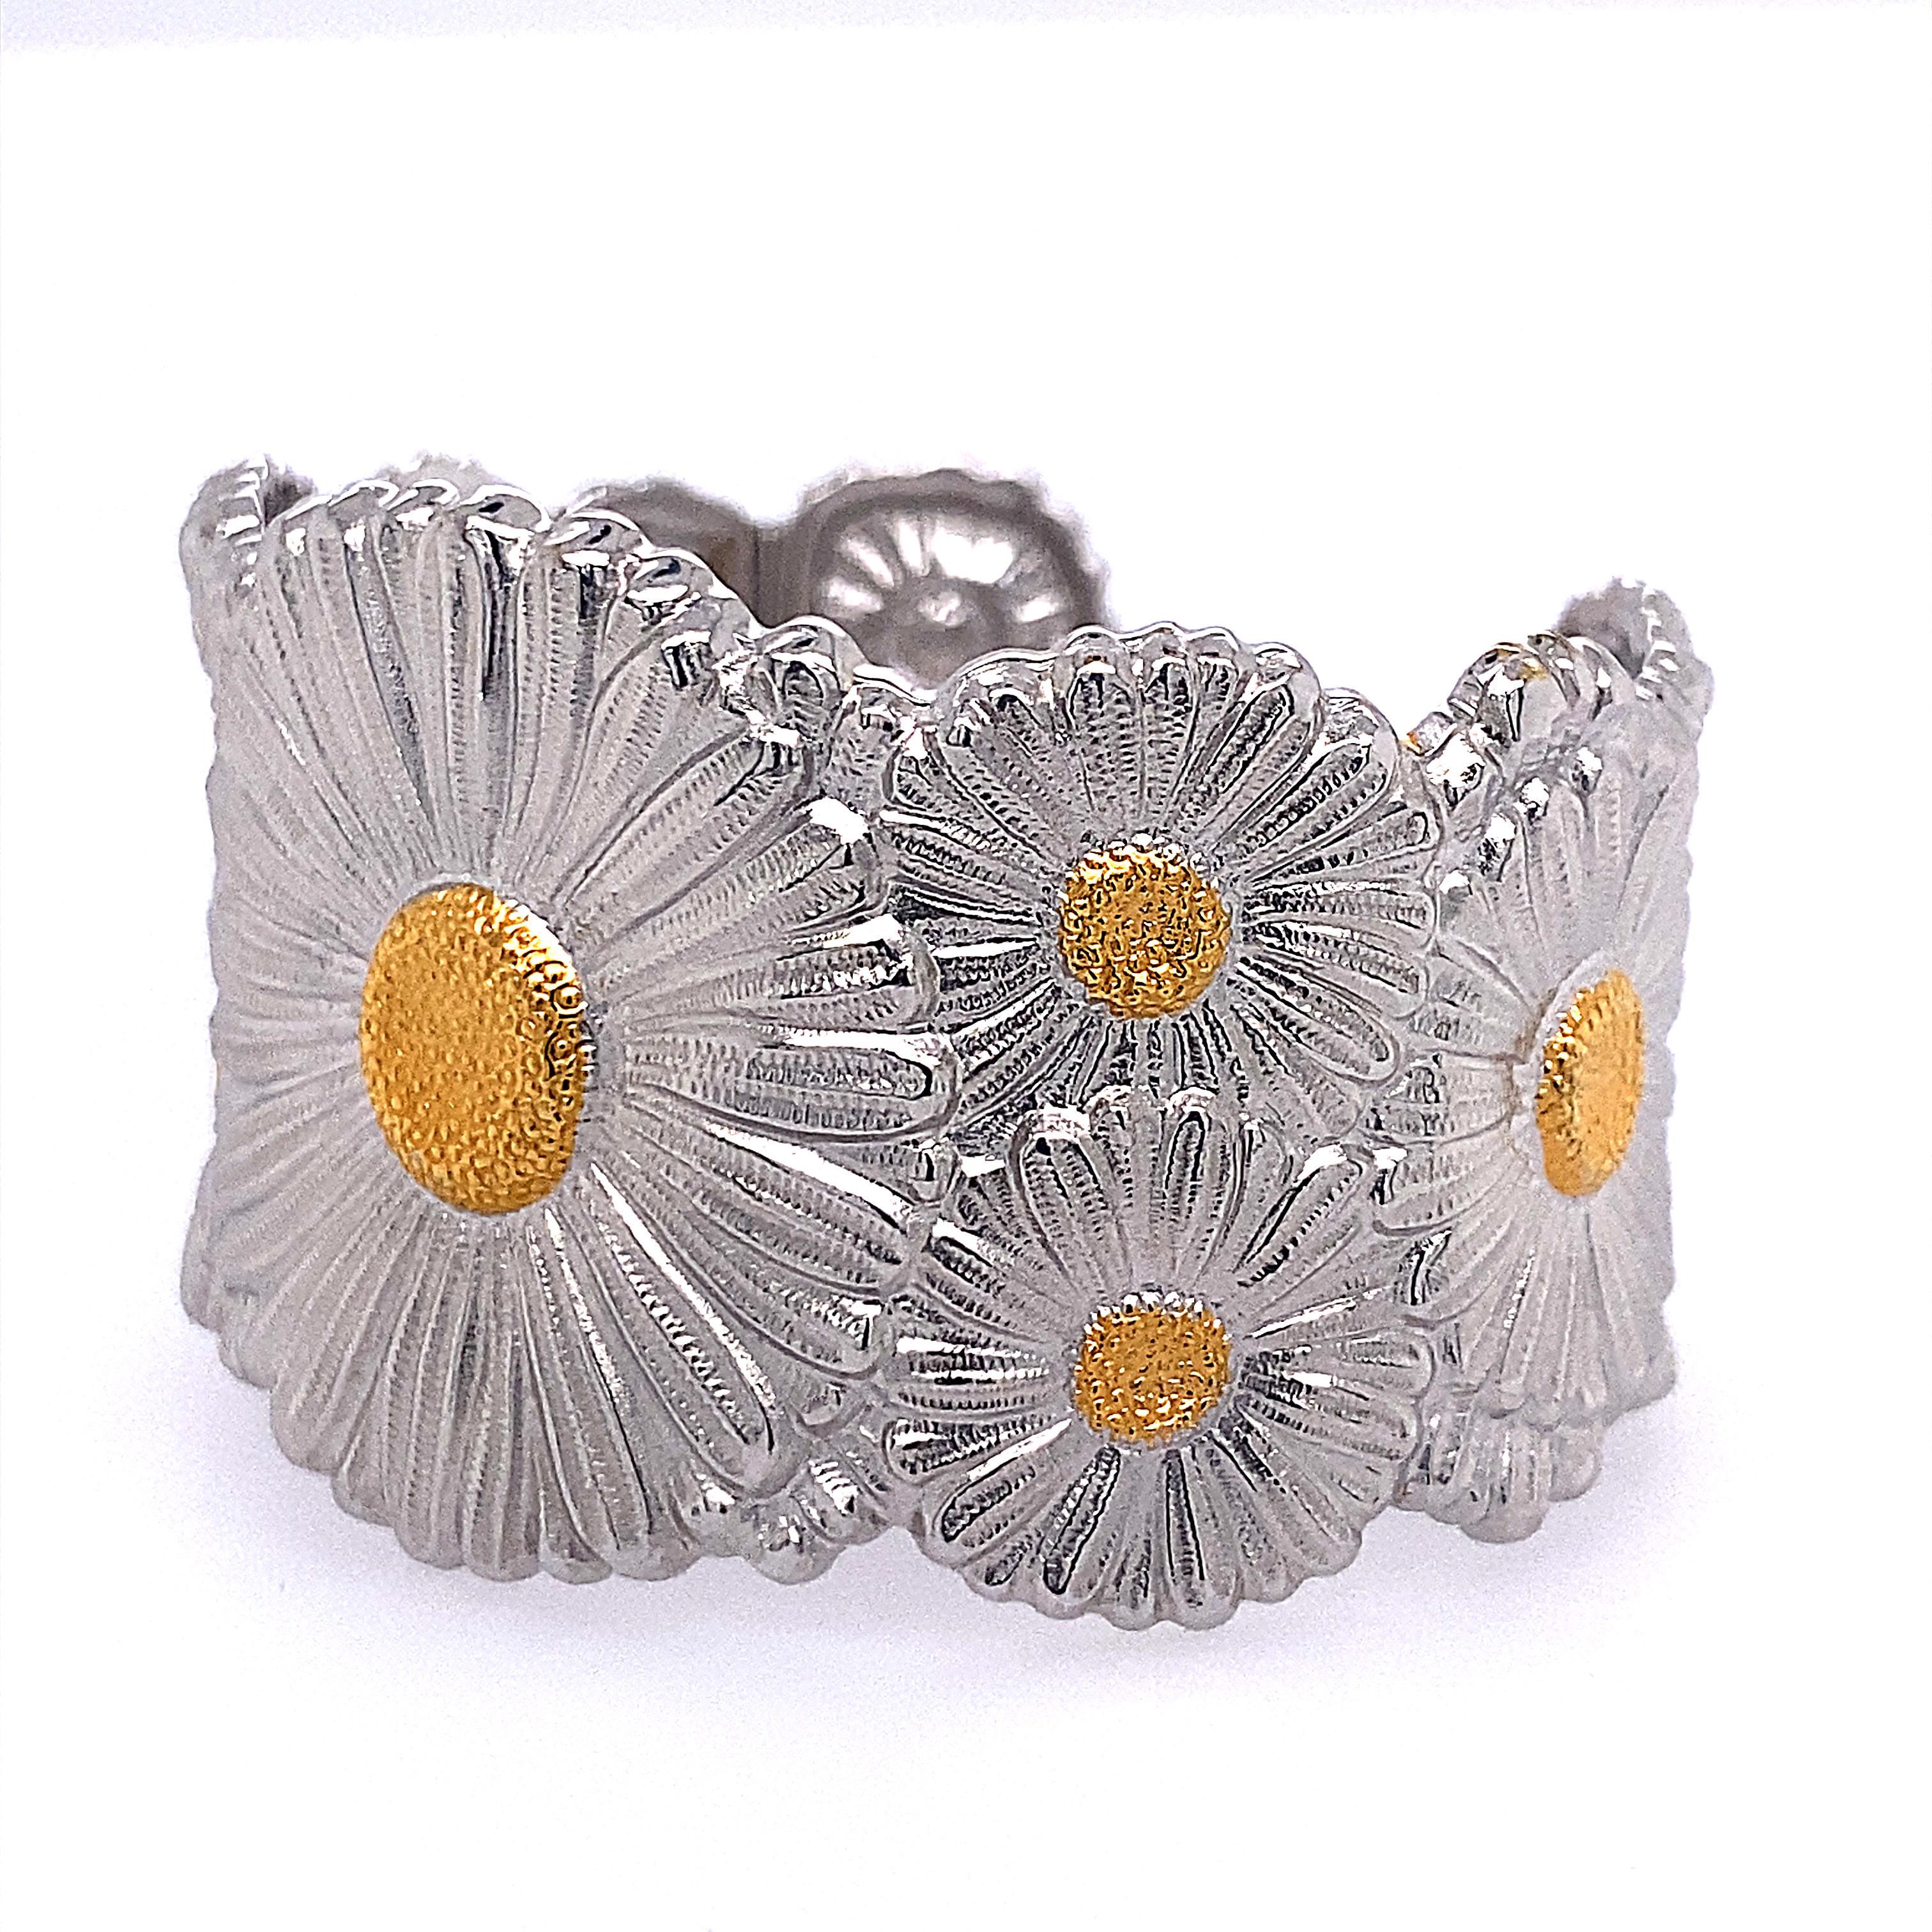 18k yellow gold and sterling silver wide cuff bracelet by Buccellati, depicting Daisy flowers. Will fit approx. 7